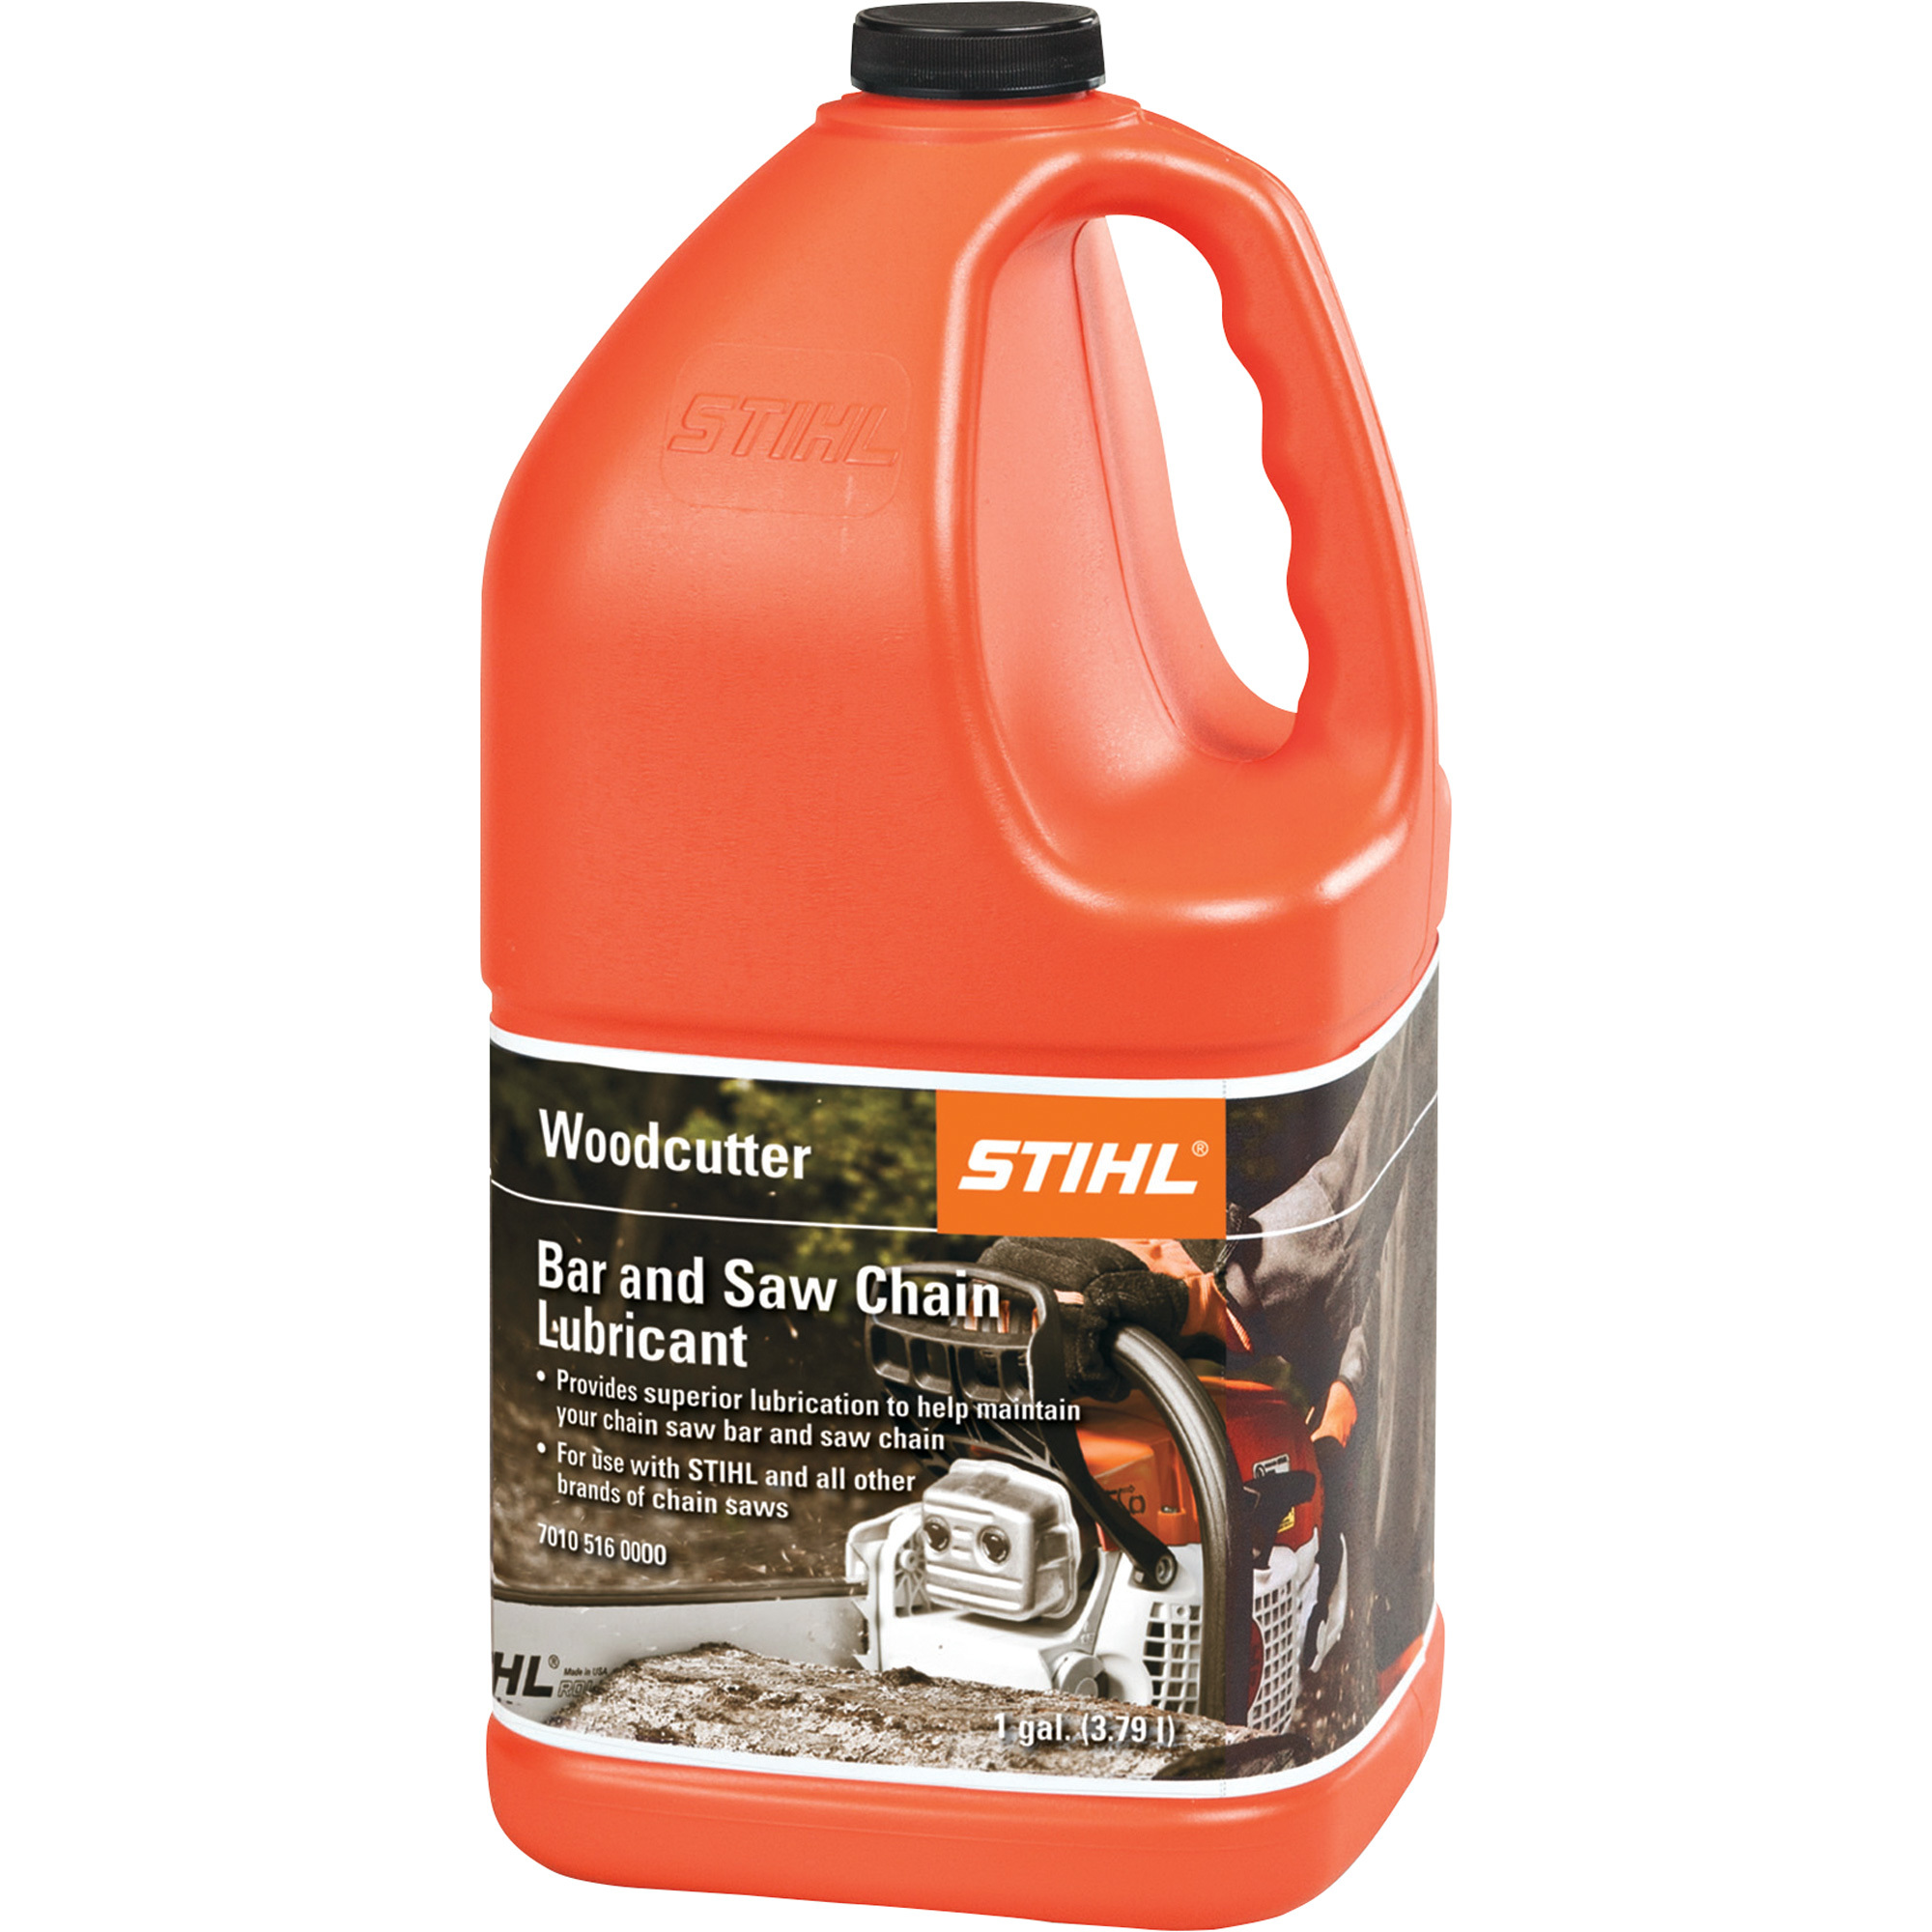 STIHL Woodcutter Bar and Saw Chain Lubricant â 1-Gallon Jug